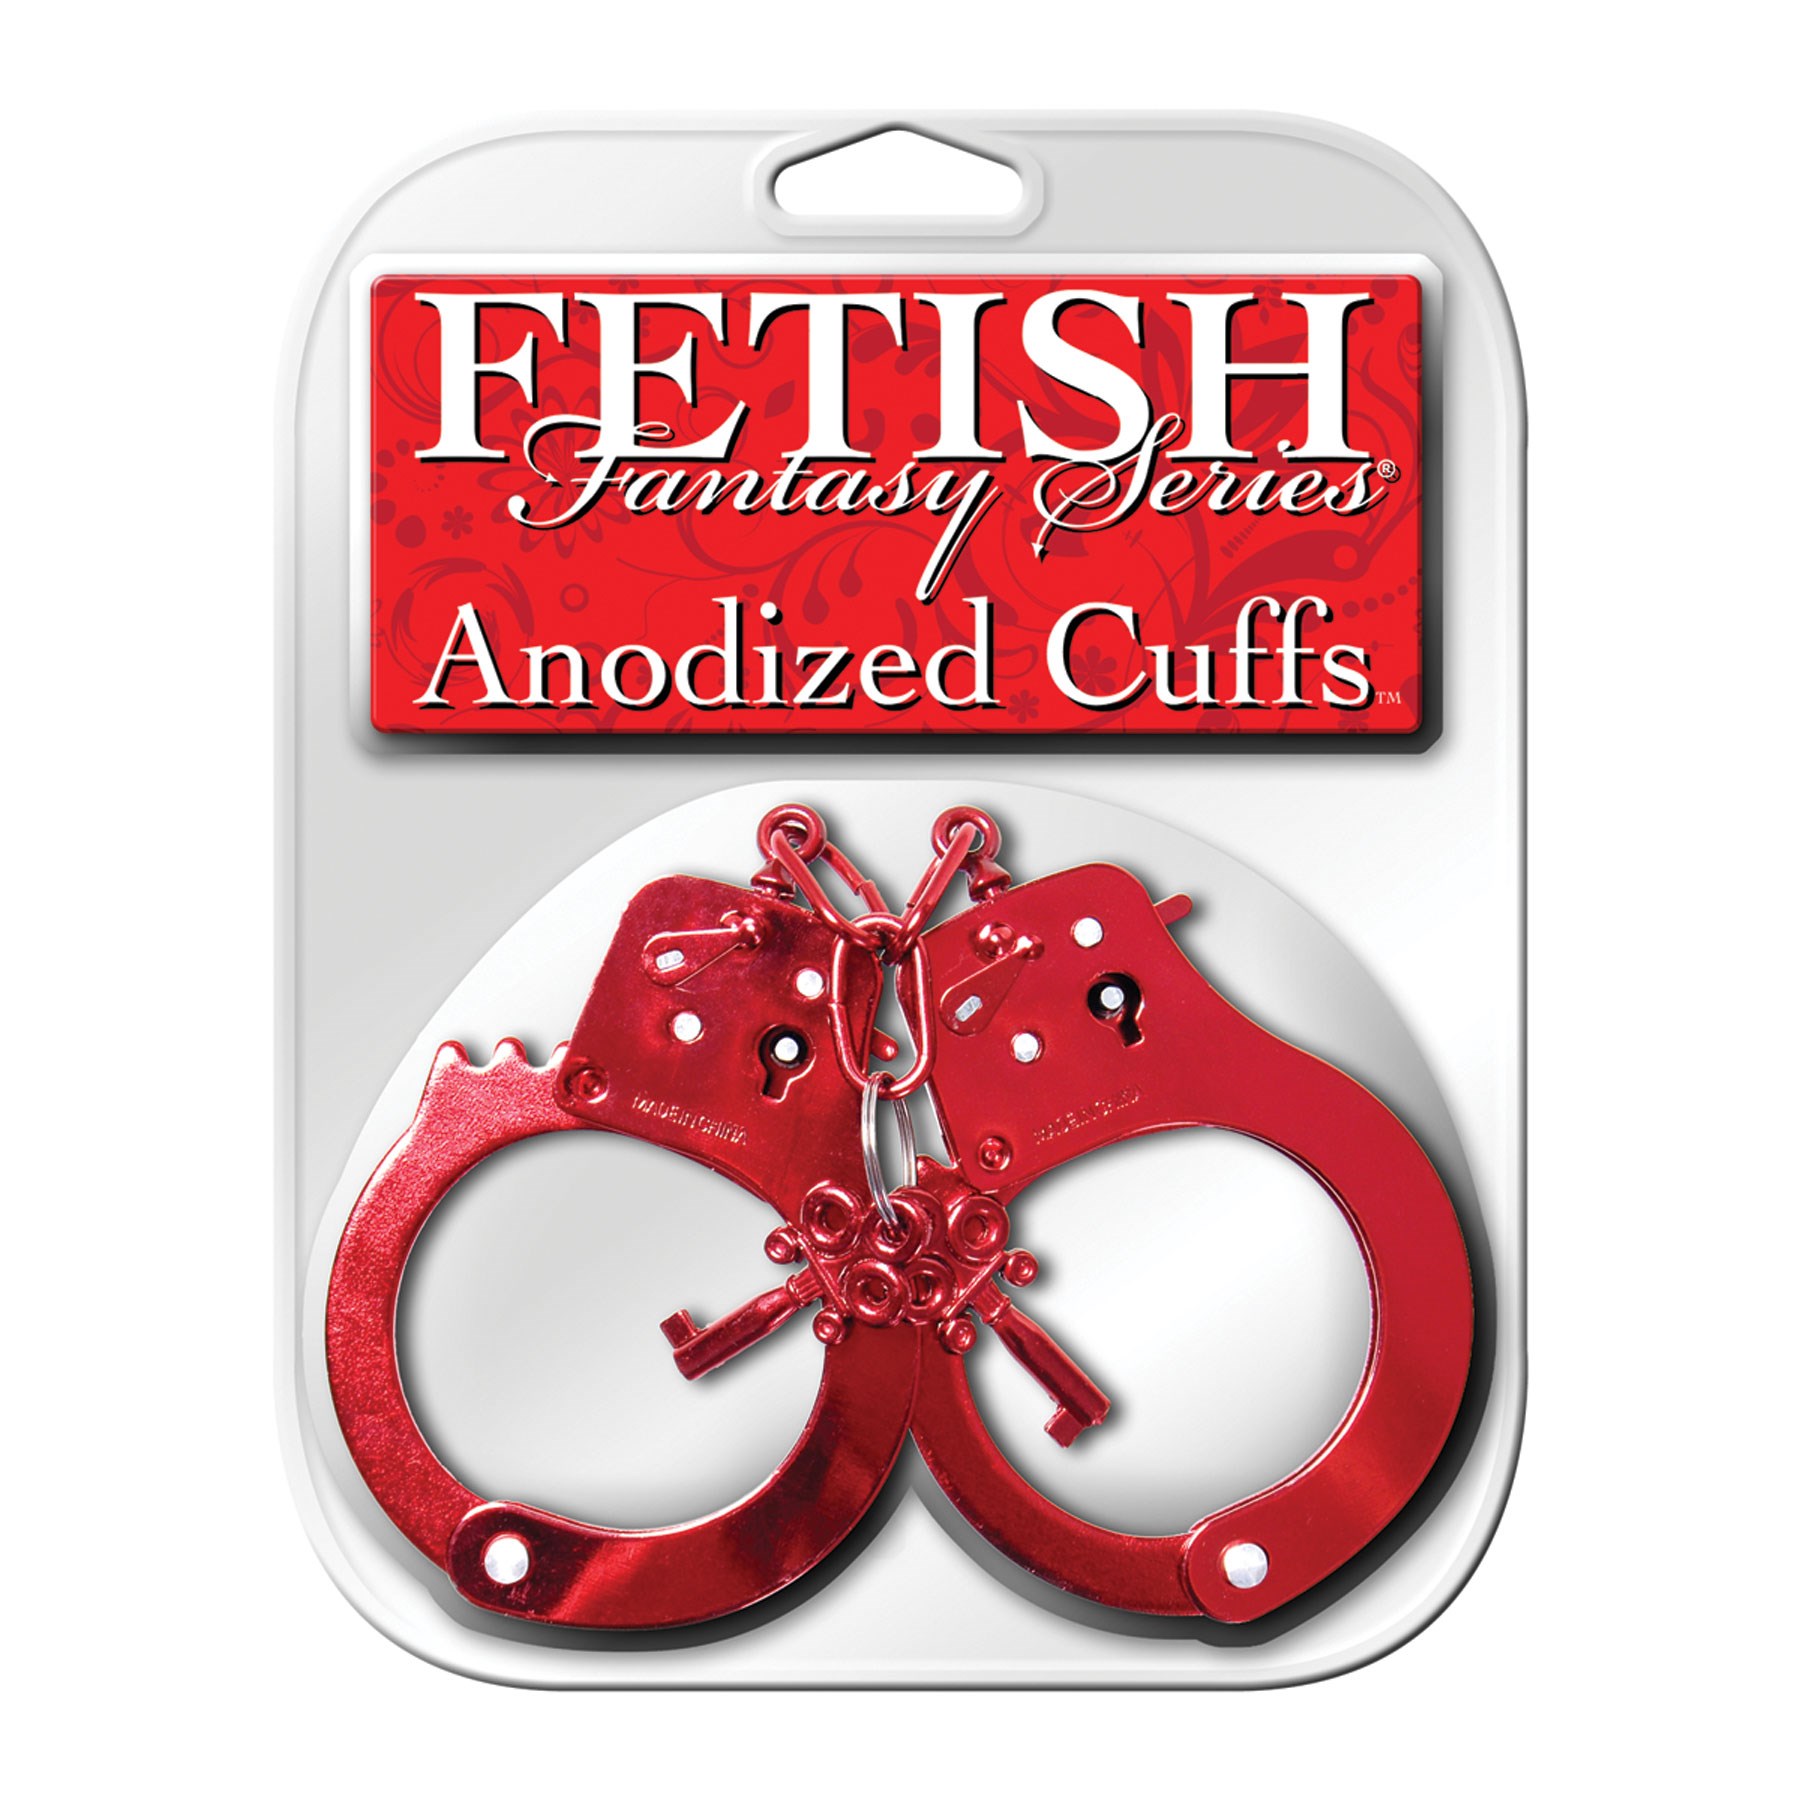 Fetish Fantasy Handcuffs red packaging